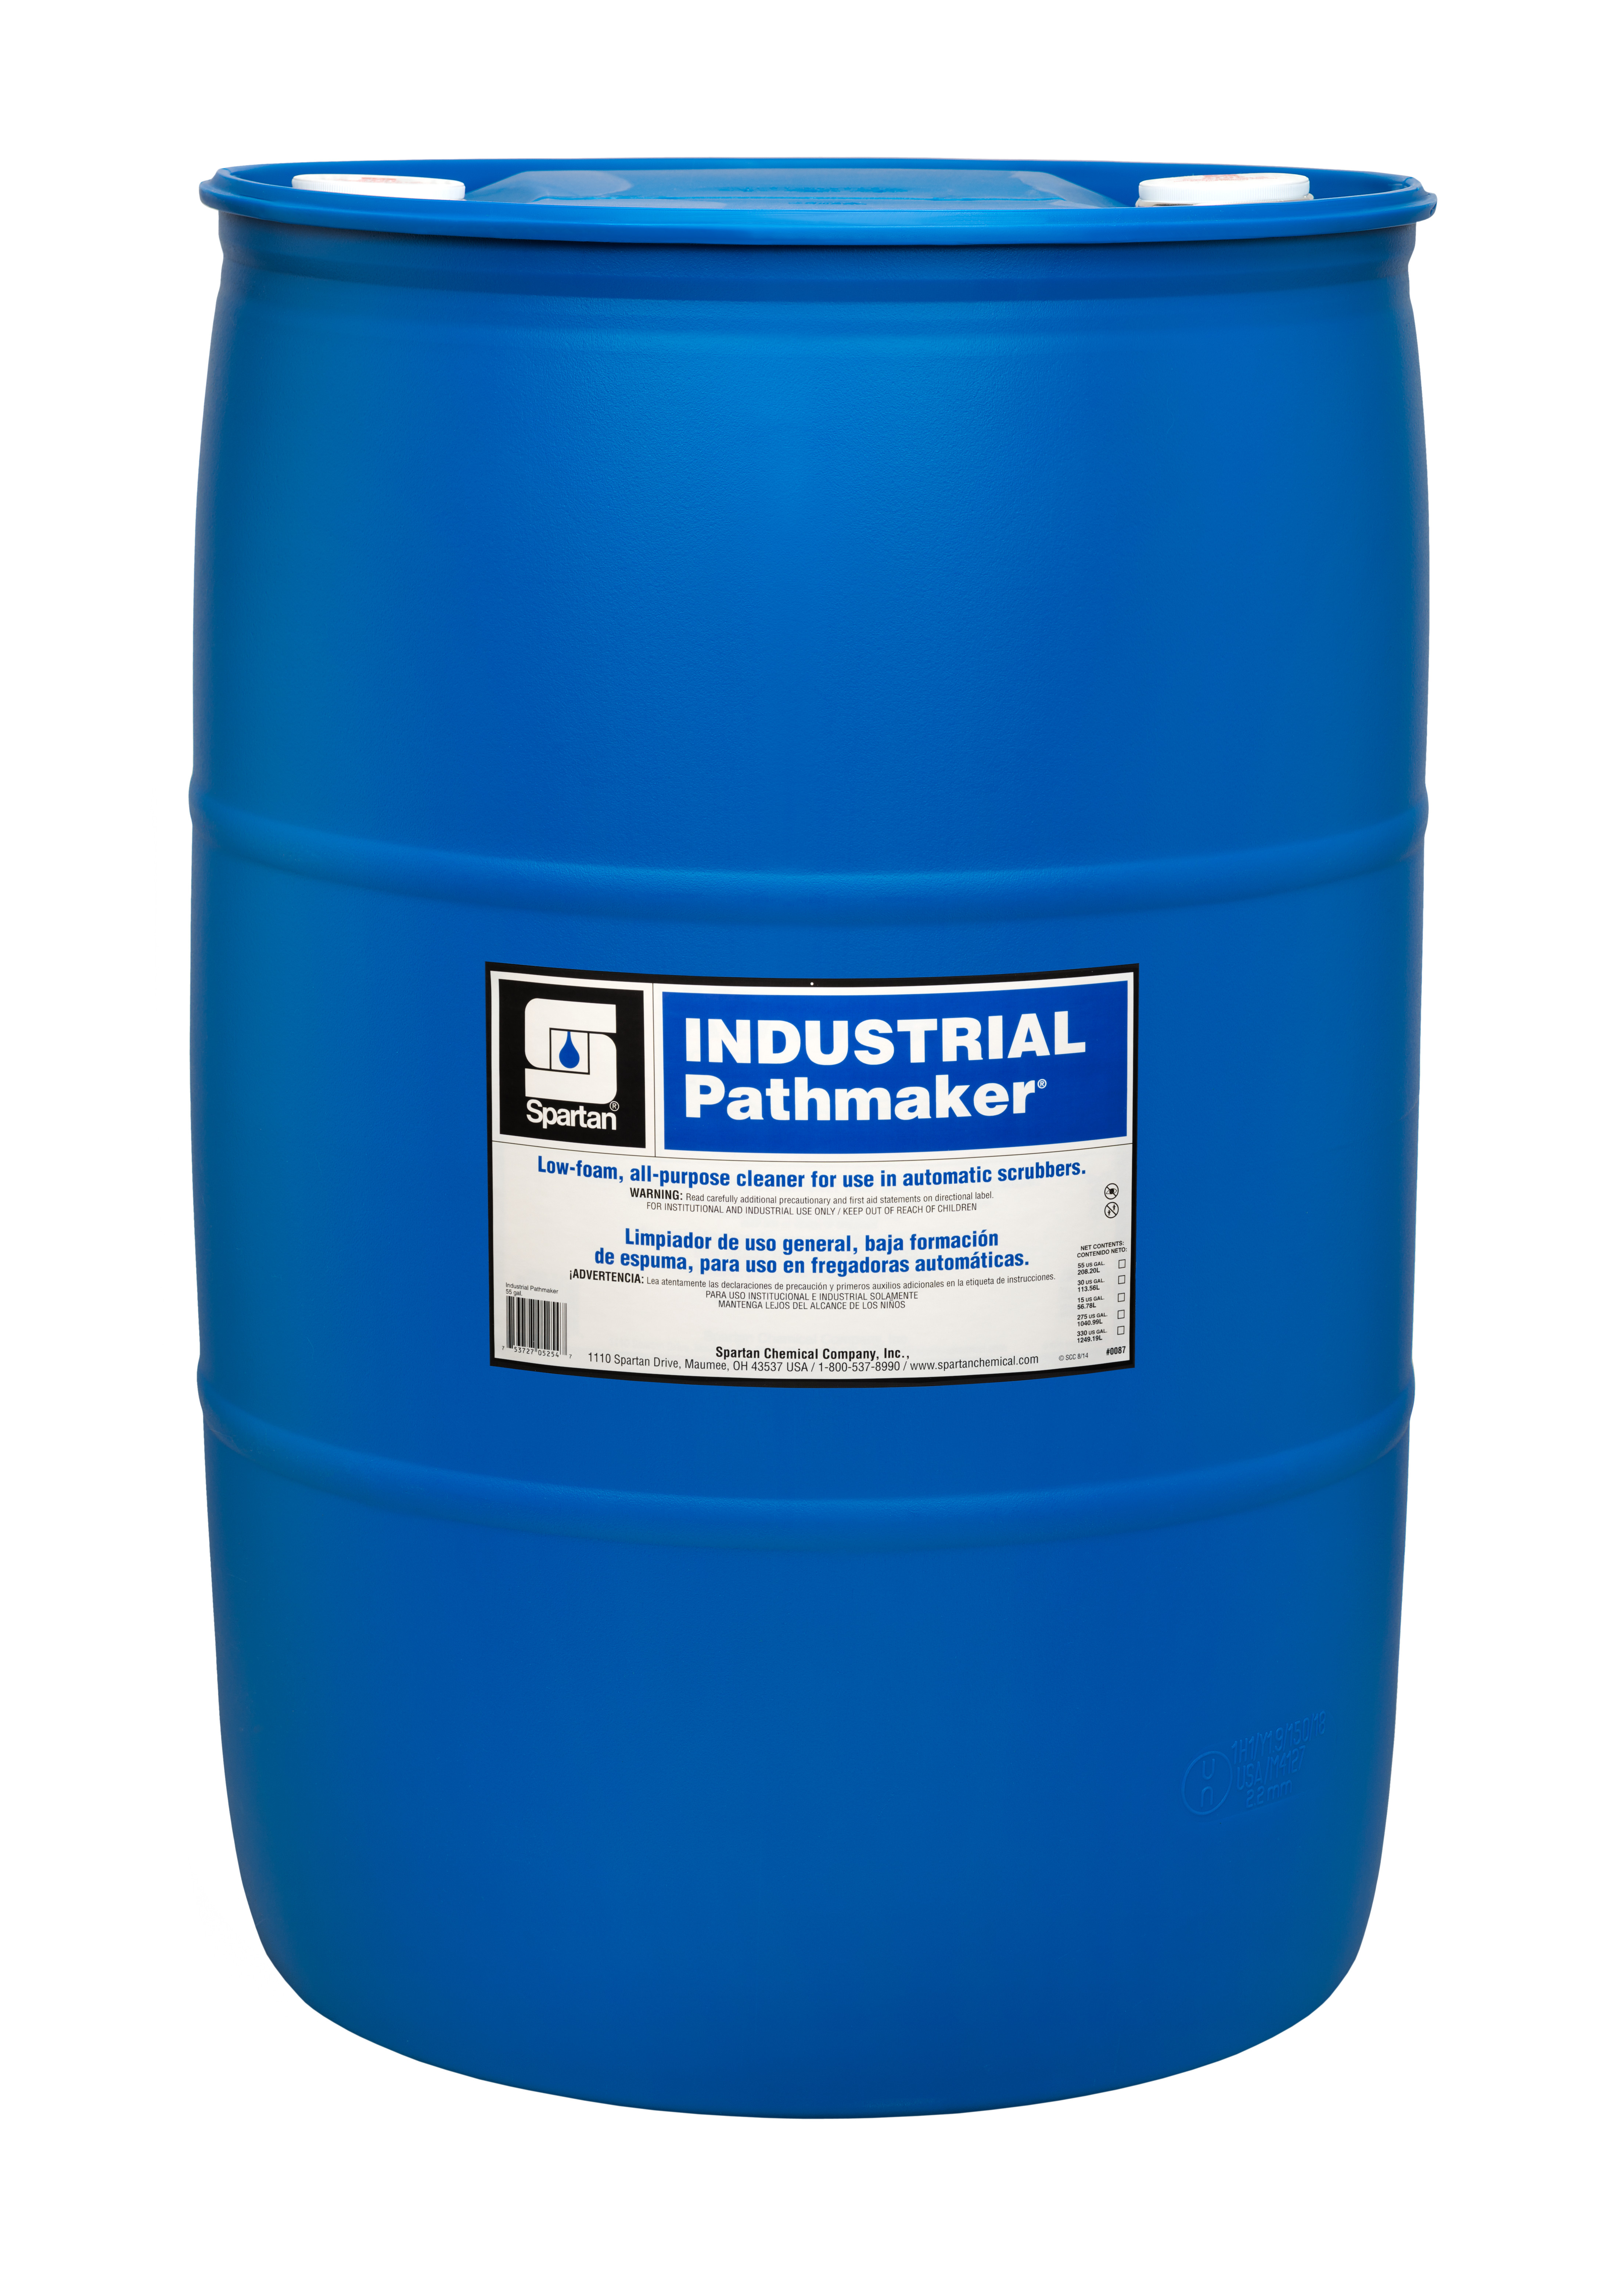 Spartan Chemical Company Industrial Pathmaker, 55 GAL DRUM